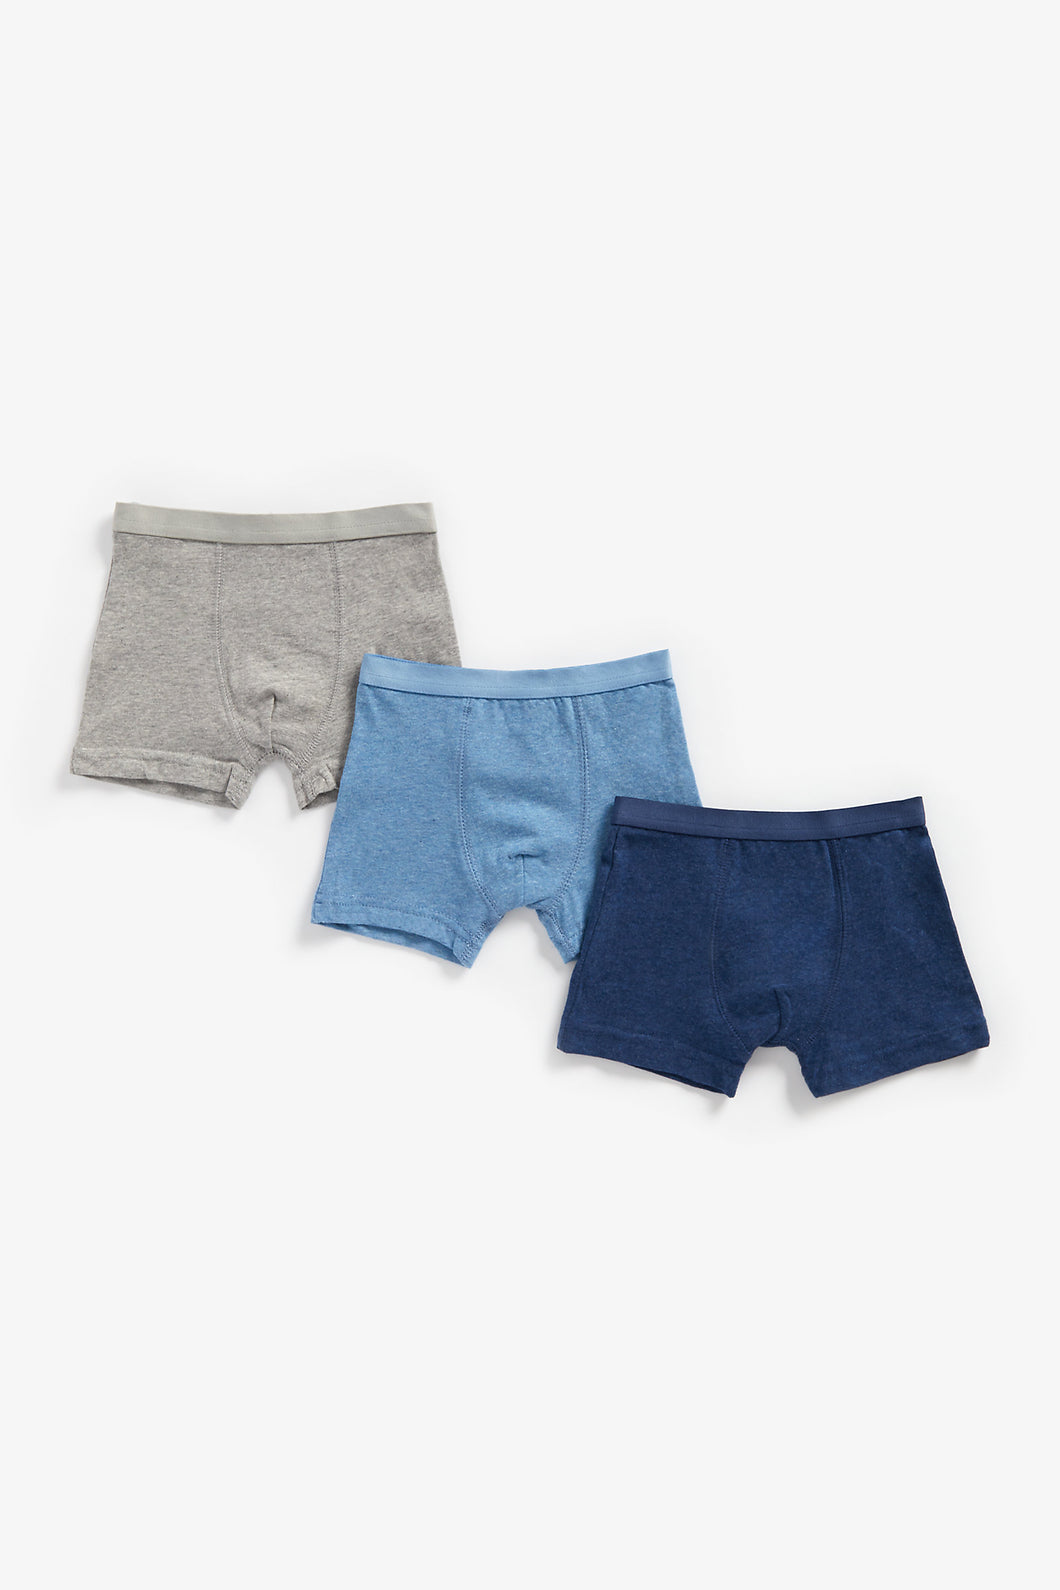 Mothercare Marl Trunk Briefs - 3 Pack